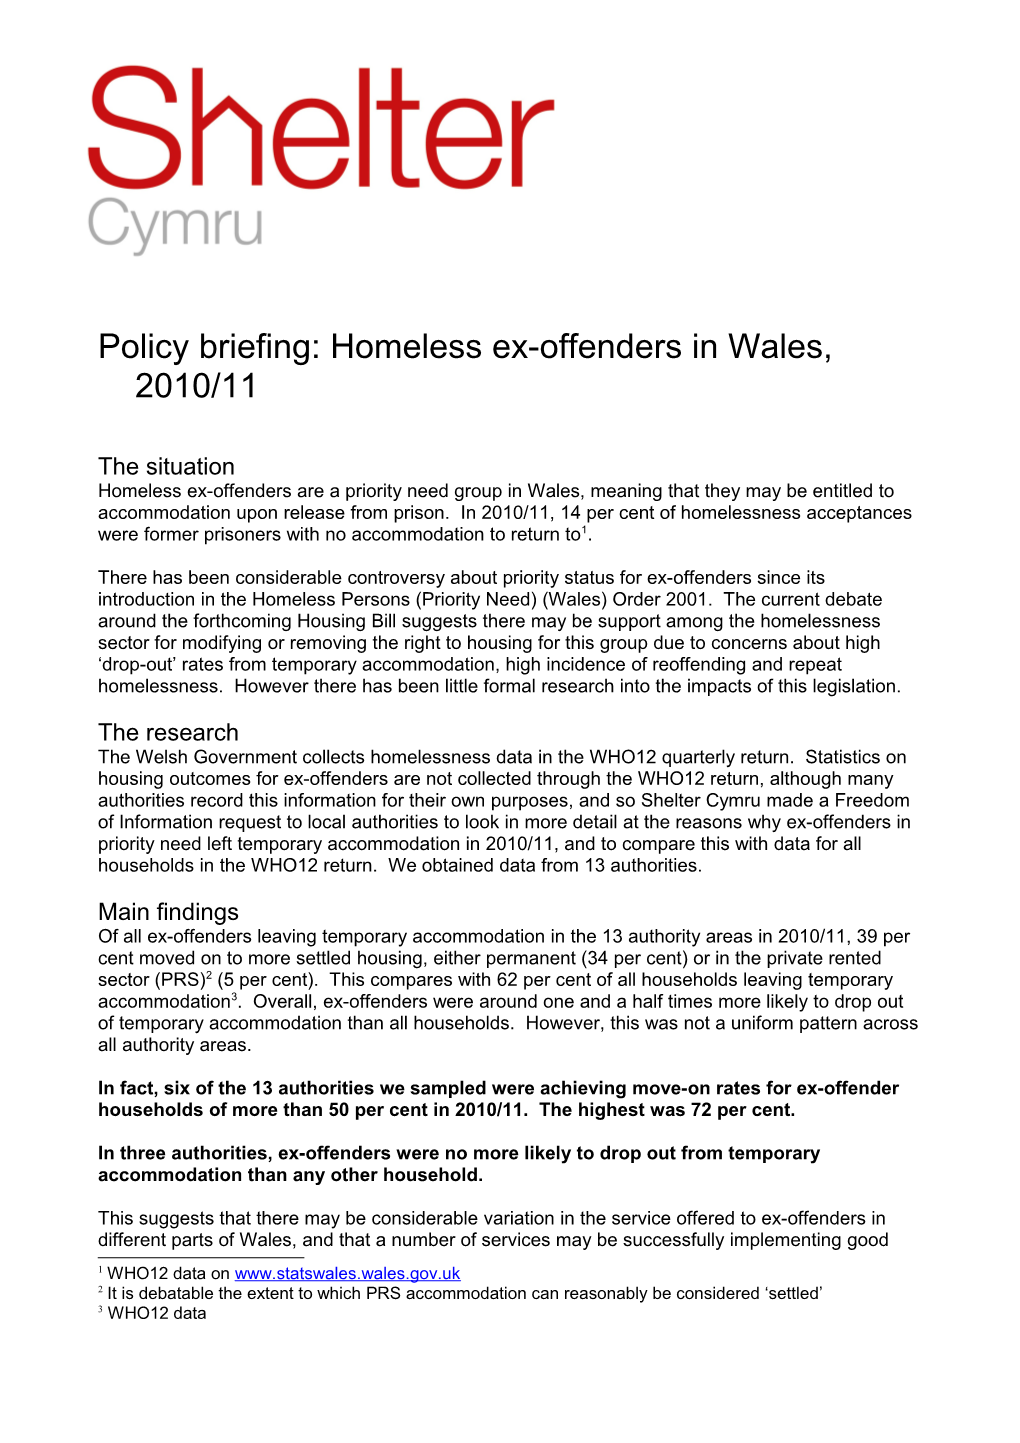 Policy Briefing: Homeless Ex-Offenders in Wales, 2010/11